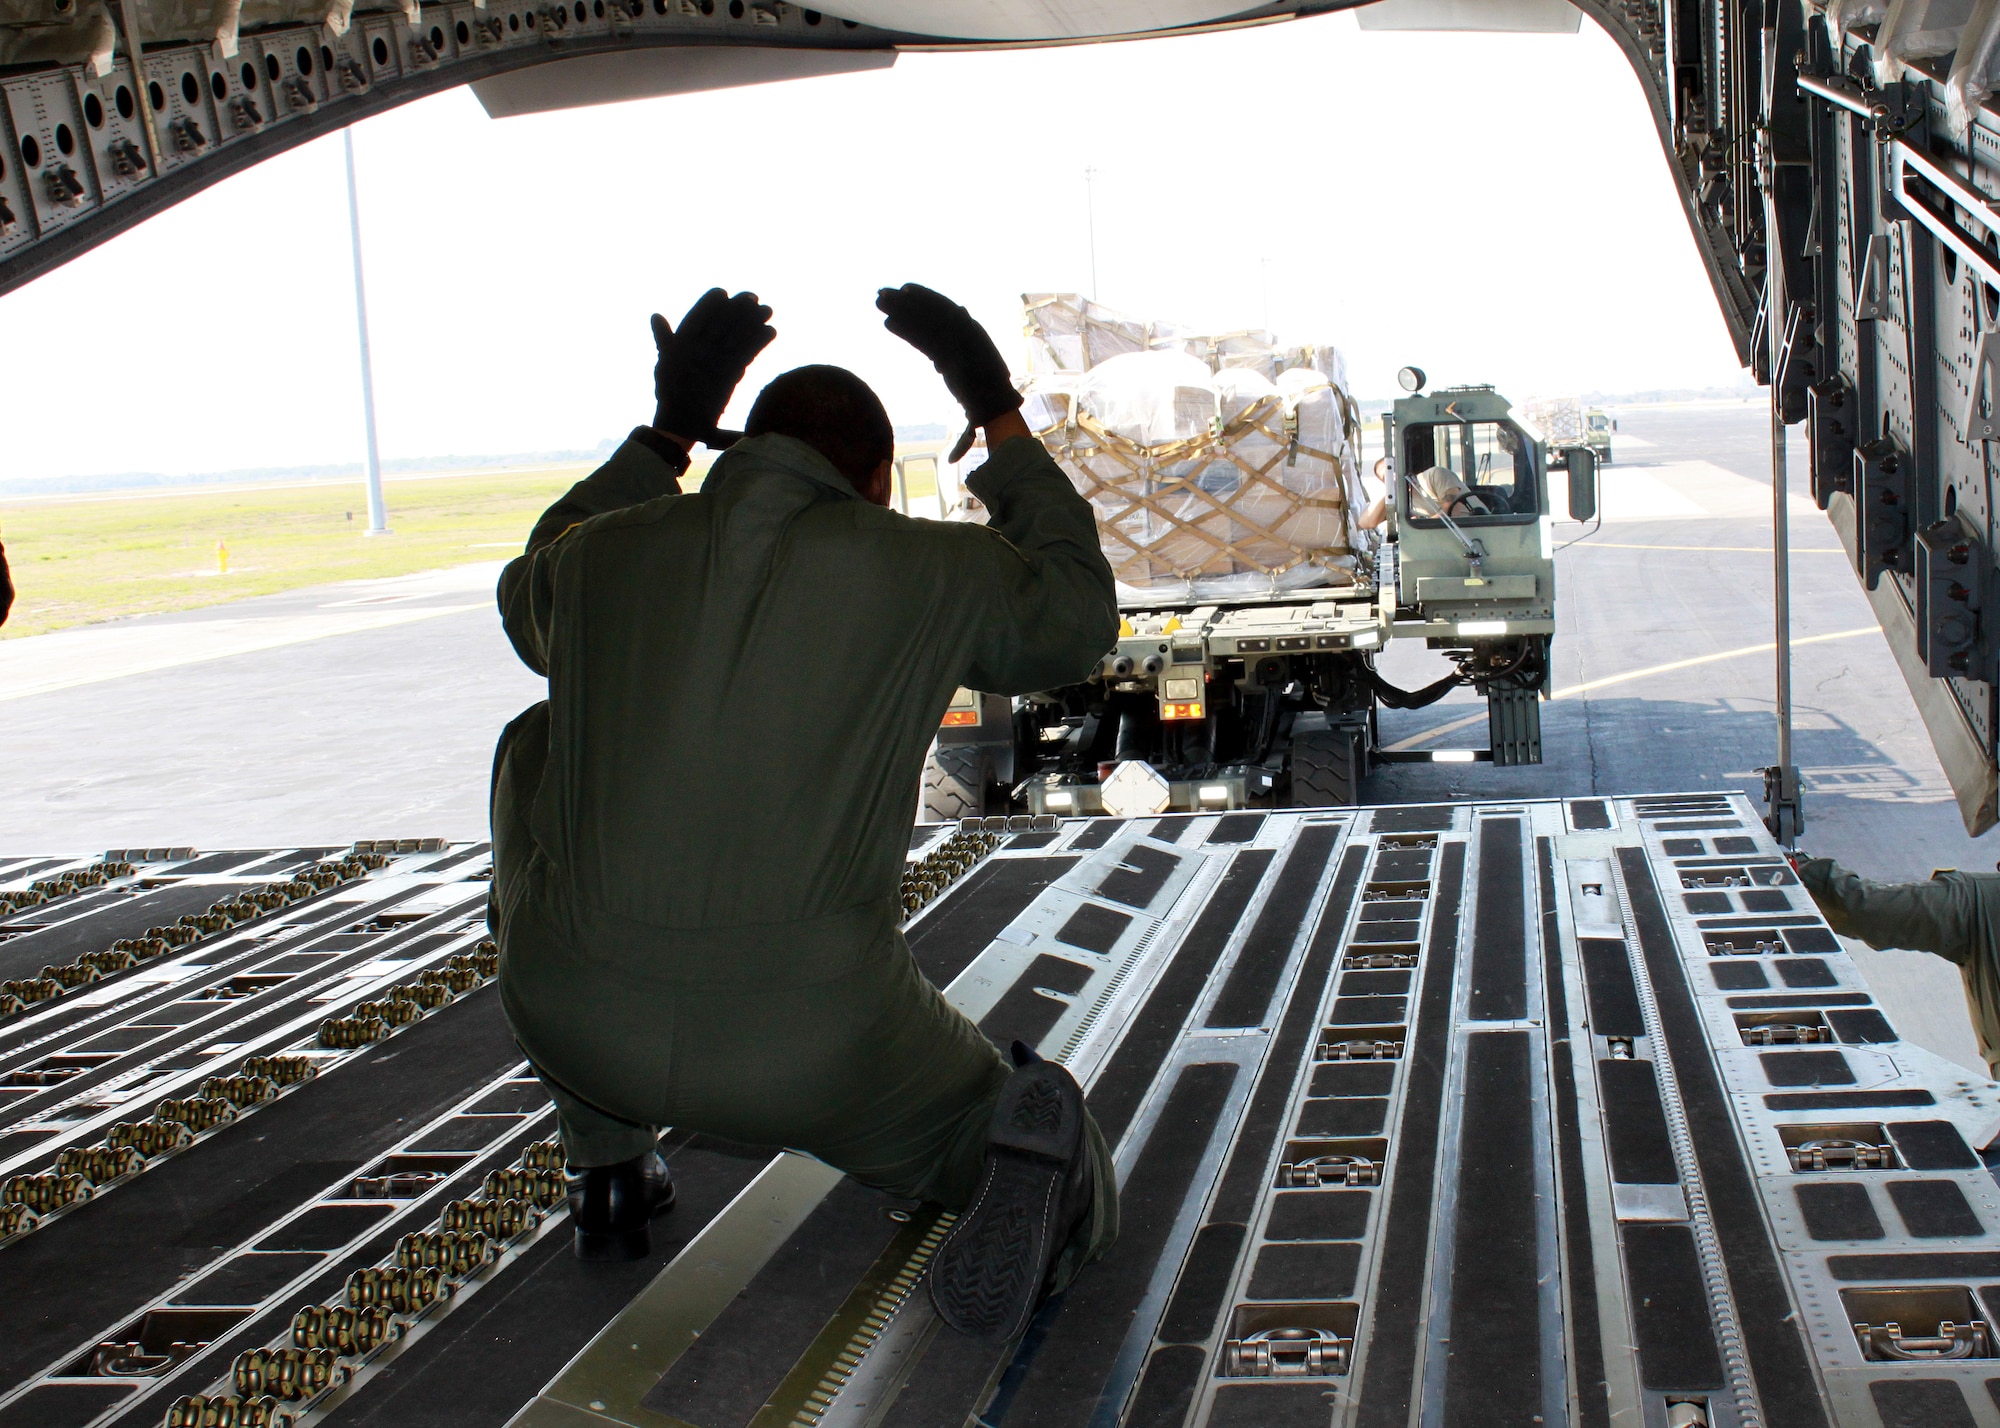 JOINT BASE MCGUIRE-DIX-LAKEHURST ? Loadmaster Tech. Sgt. Sean McClendon, 732nd Airlift Squadron, directs the positioning of cargo before uploading to the C-17 Globemaster III.  The C-17 aircrew accomplished training requirements with stops at three bases over the weekend to upload and download cargo under the Denton Program intended for delivery to Guyana and Afghanistan. The Denton Program authorizes the Department of Defense to transport donated assistance material, free of charge, on a Space Available basis and of no cost to the government other than the cost of transportation itself.